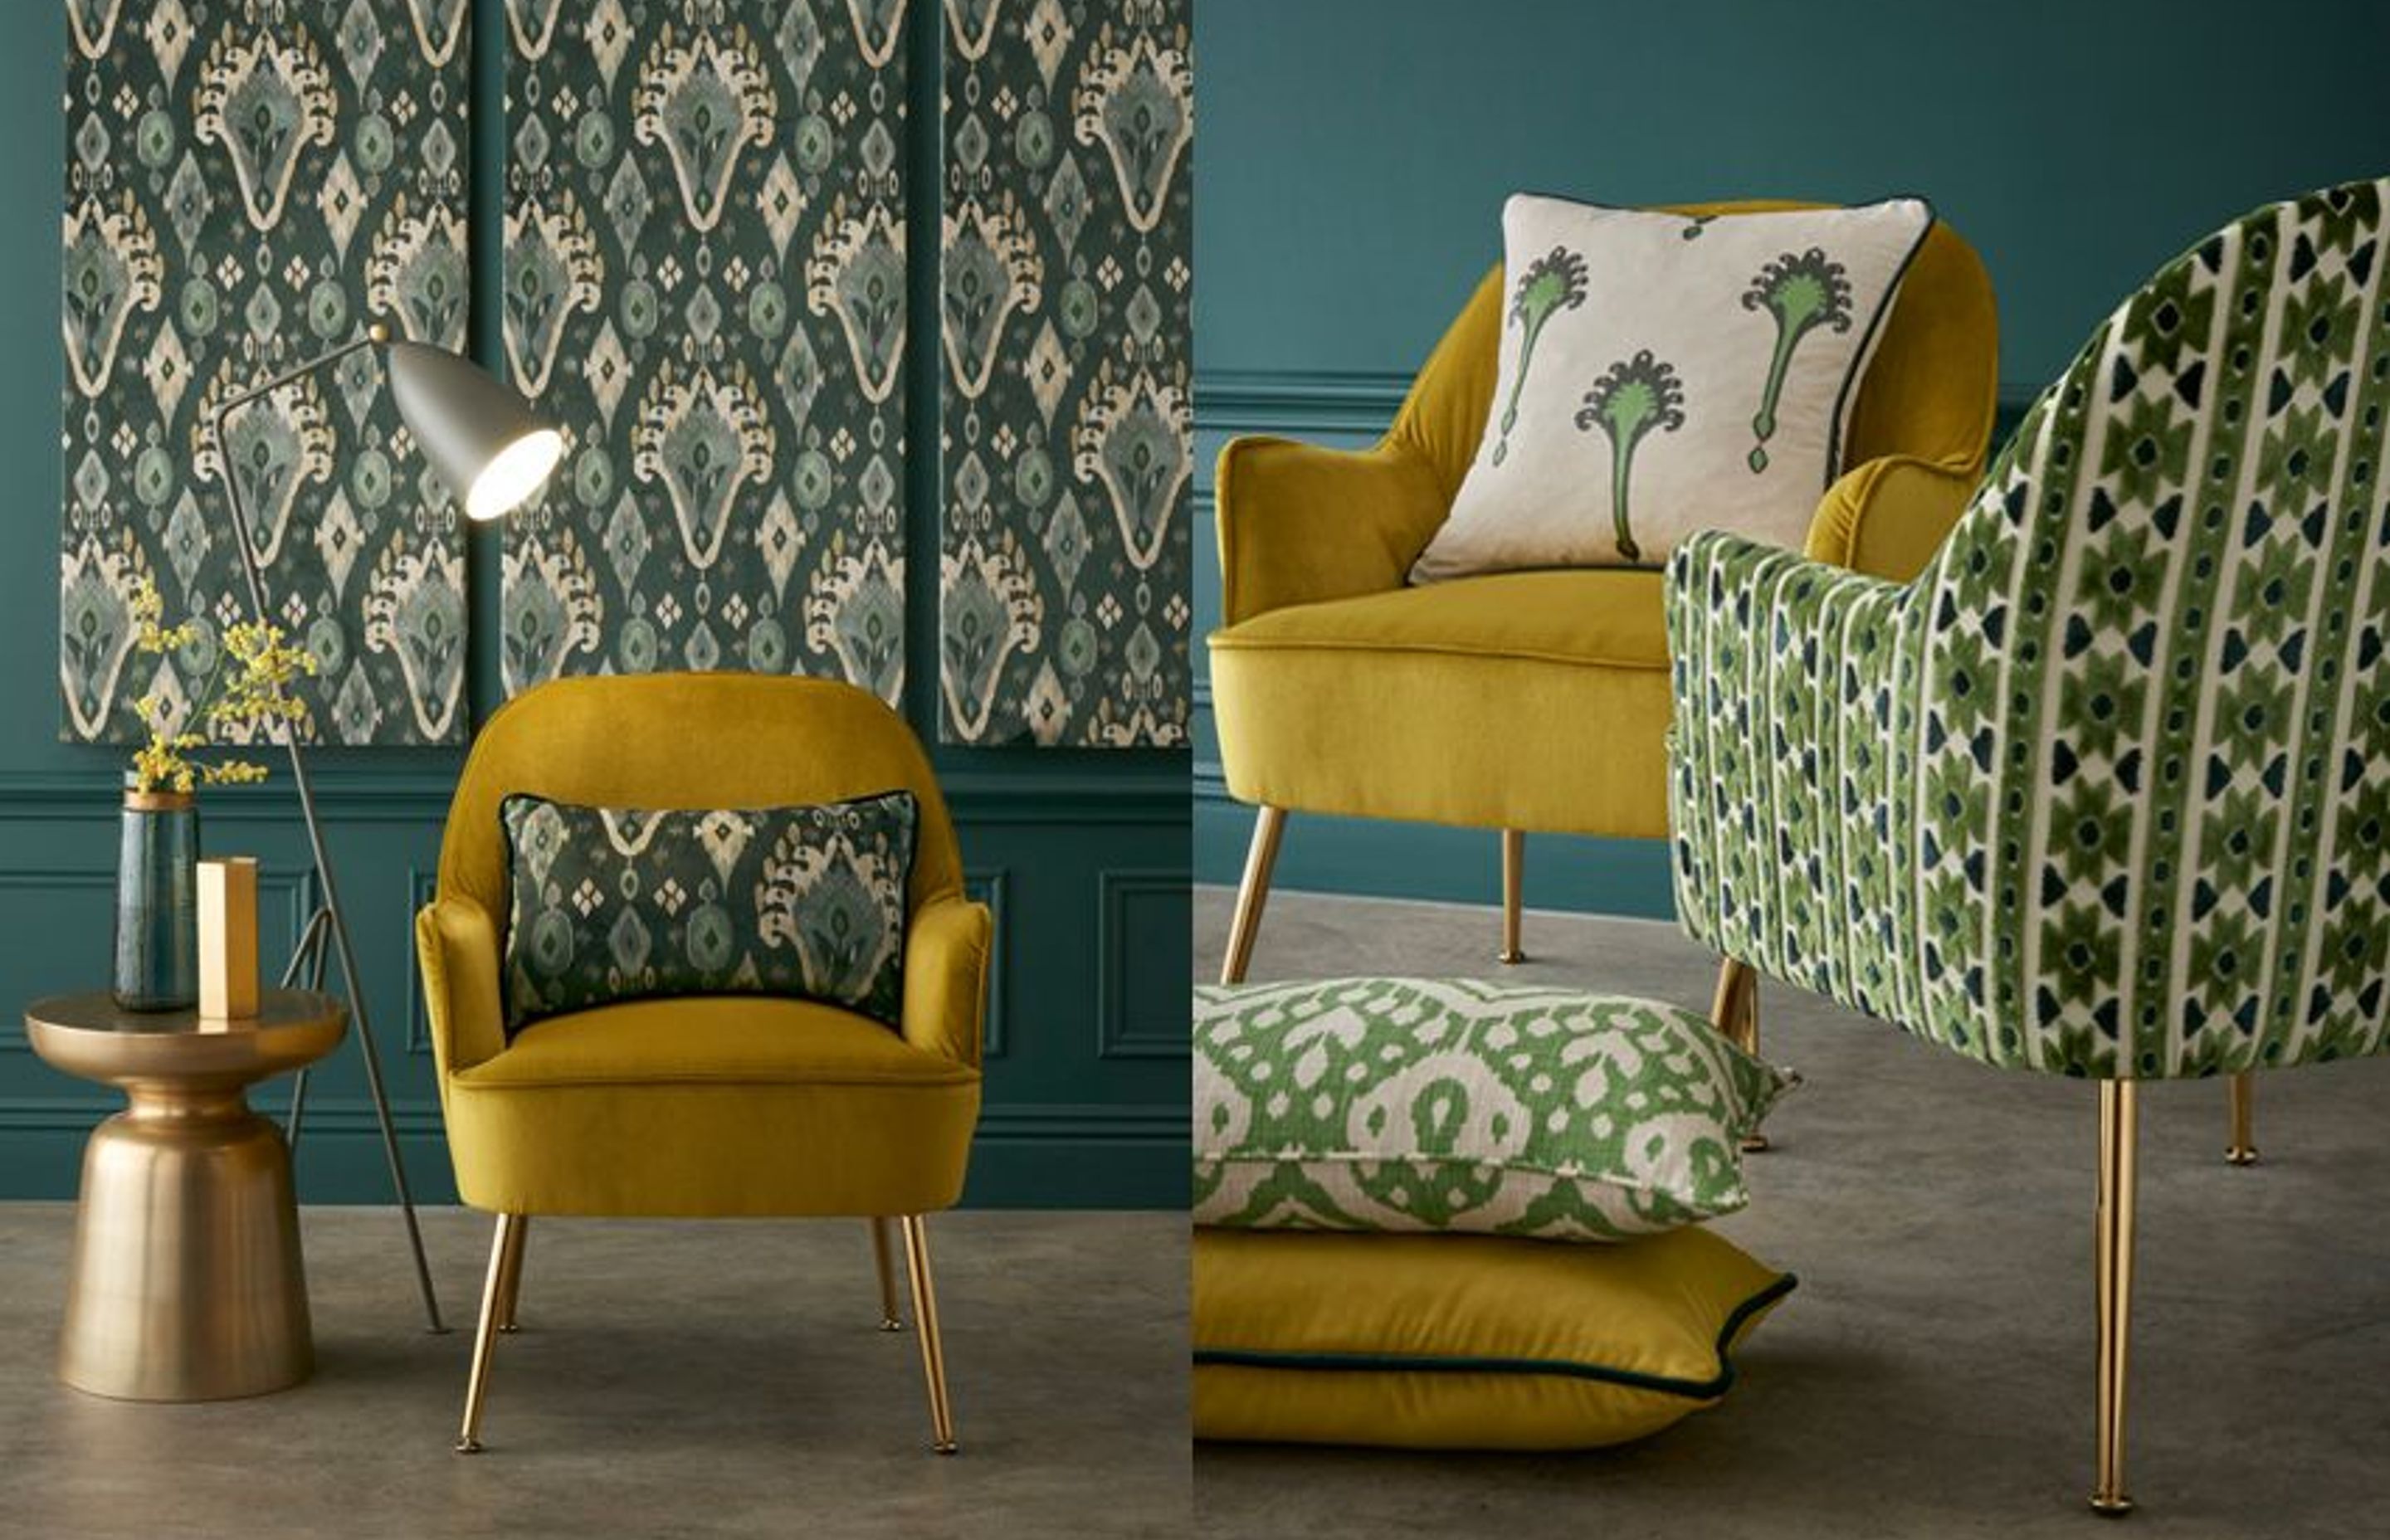 Fabrics from the Kasbah range by ILIV.